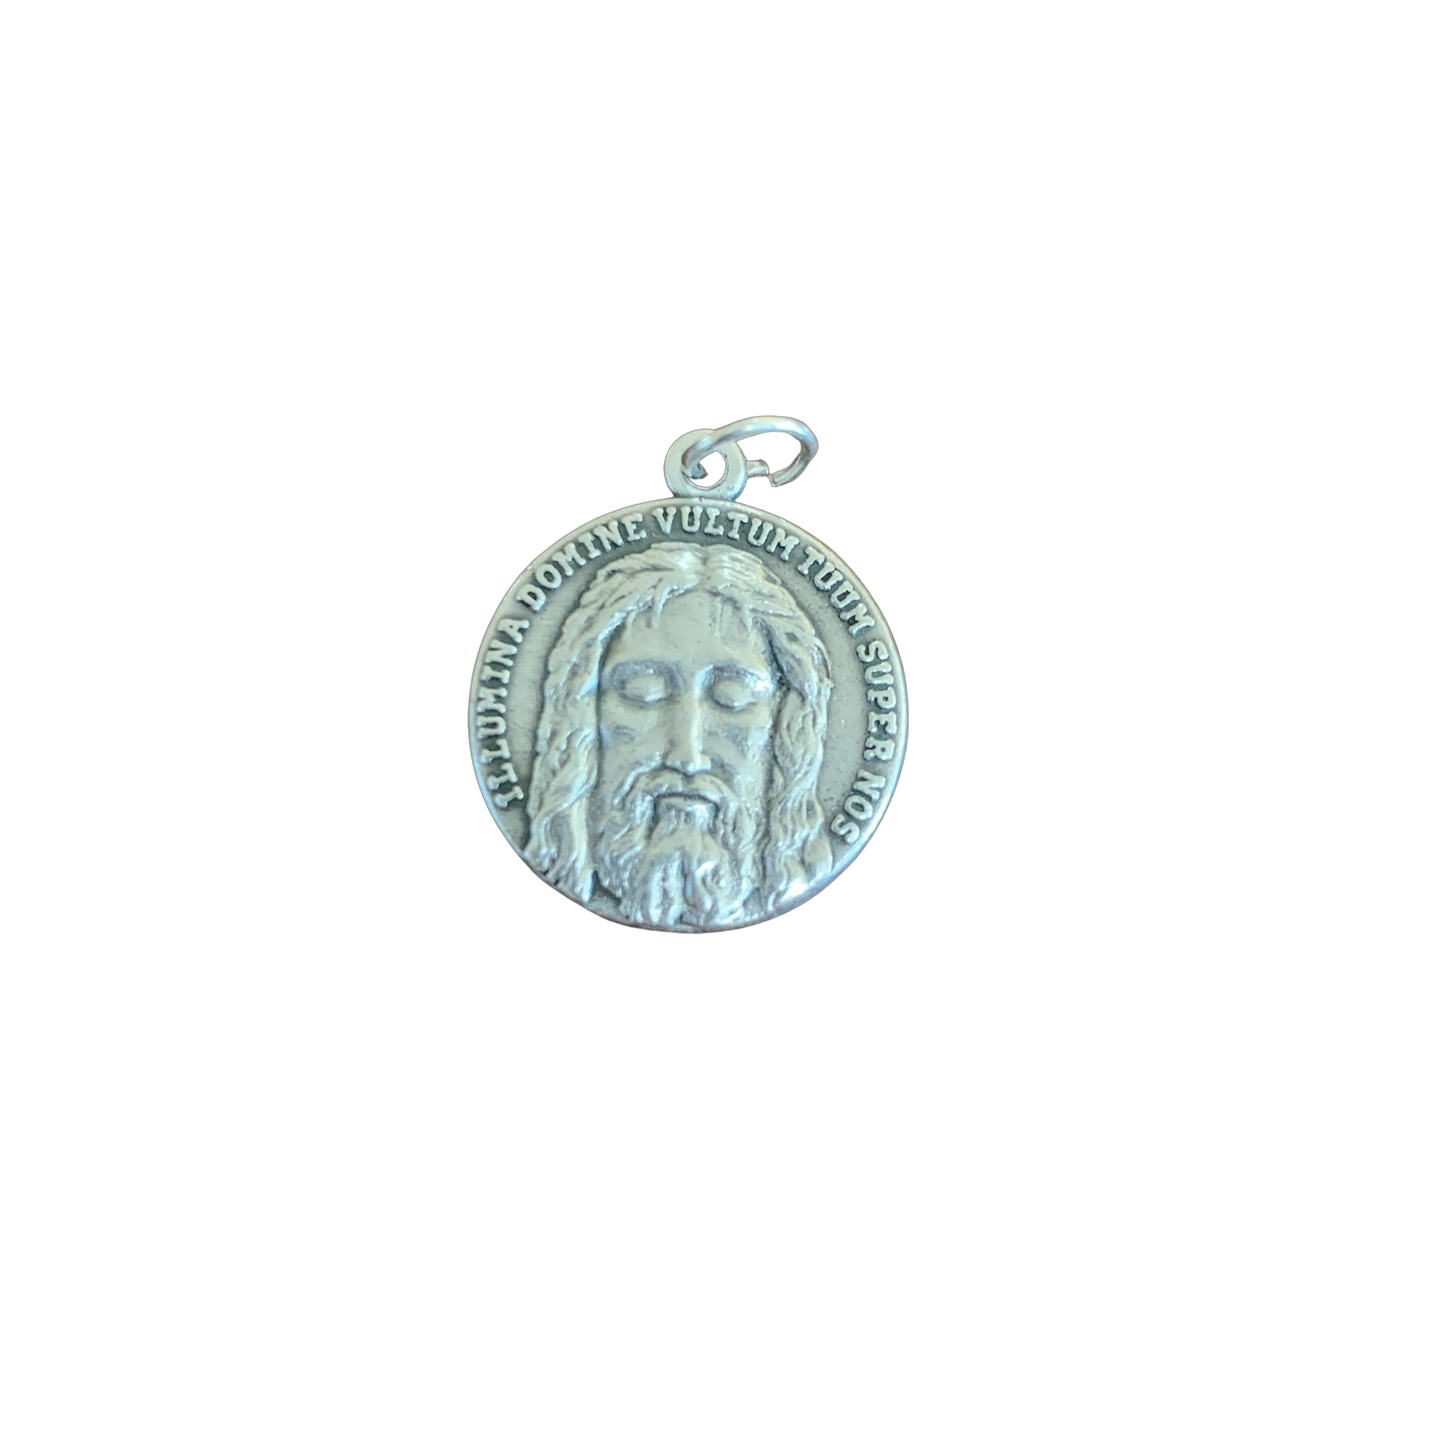 Holy Face of Jesus Medal with Small Holy Card